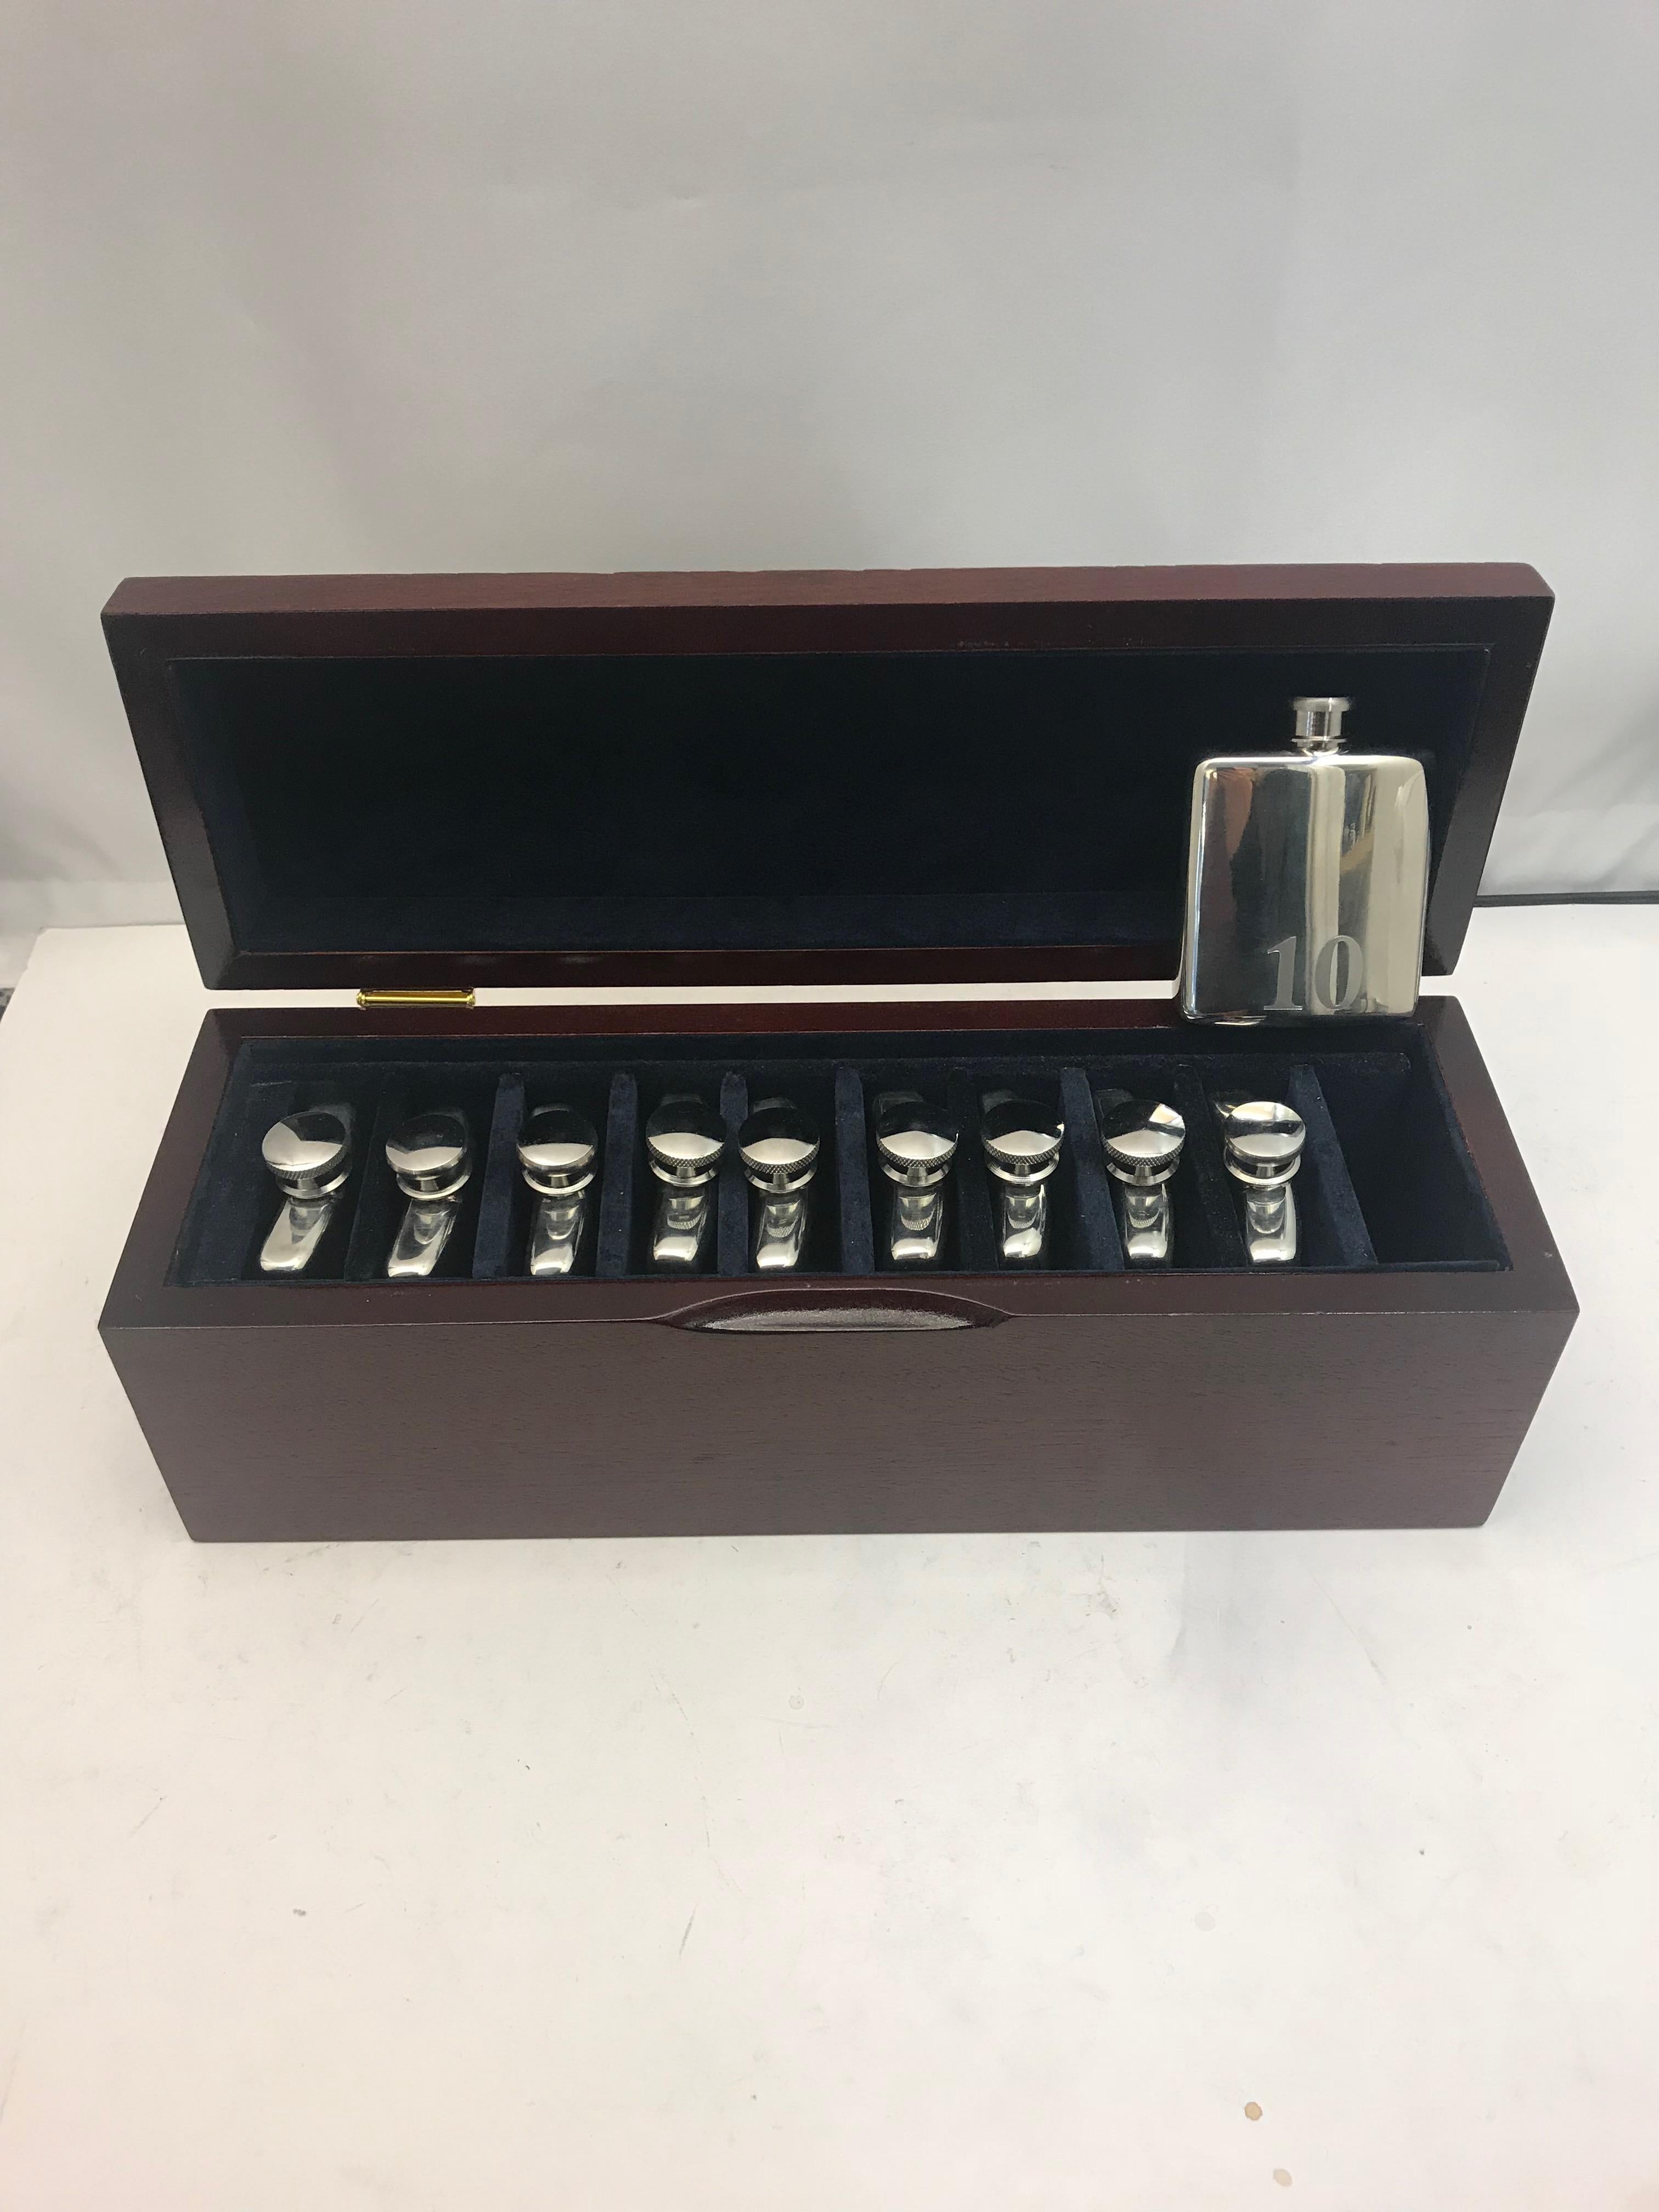 English Set of 10 Silver Plate Flasks in a Fitted Wooden Box